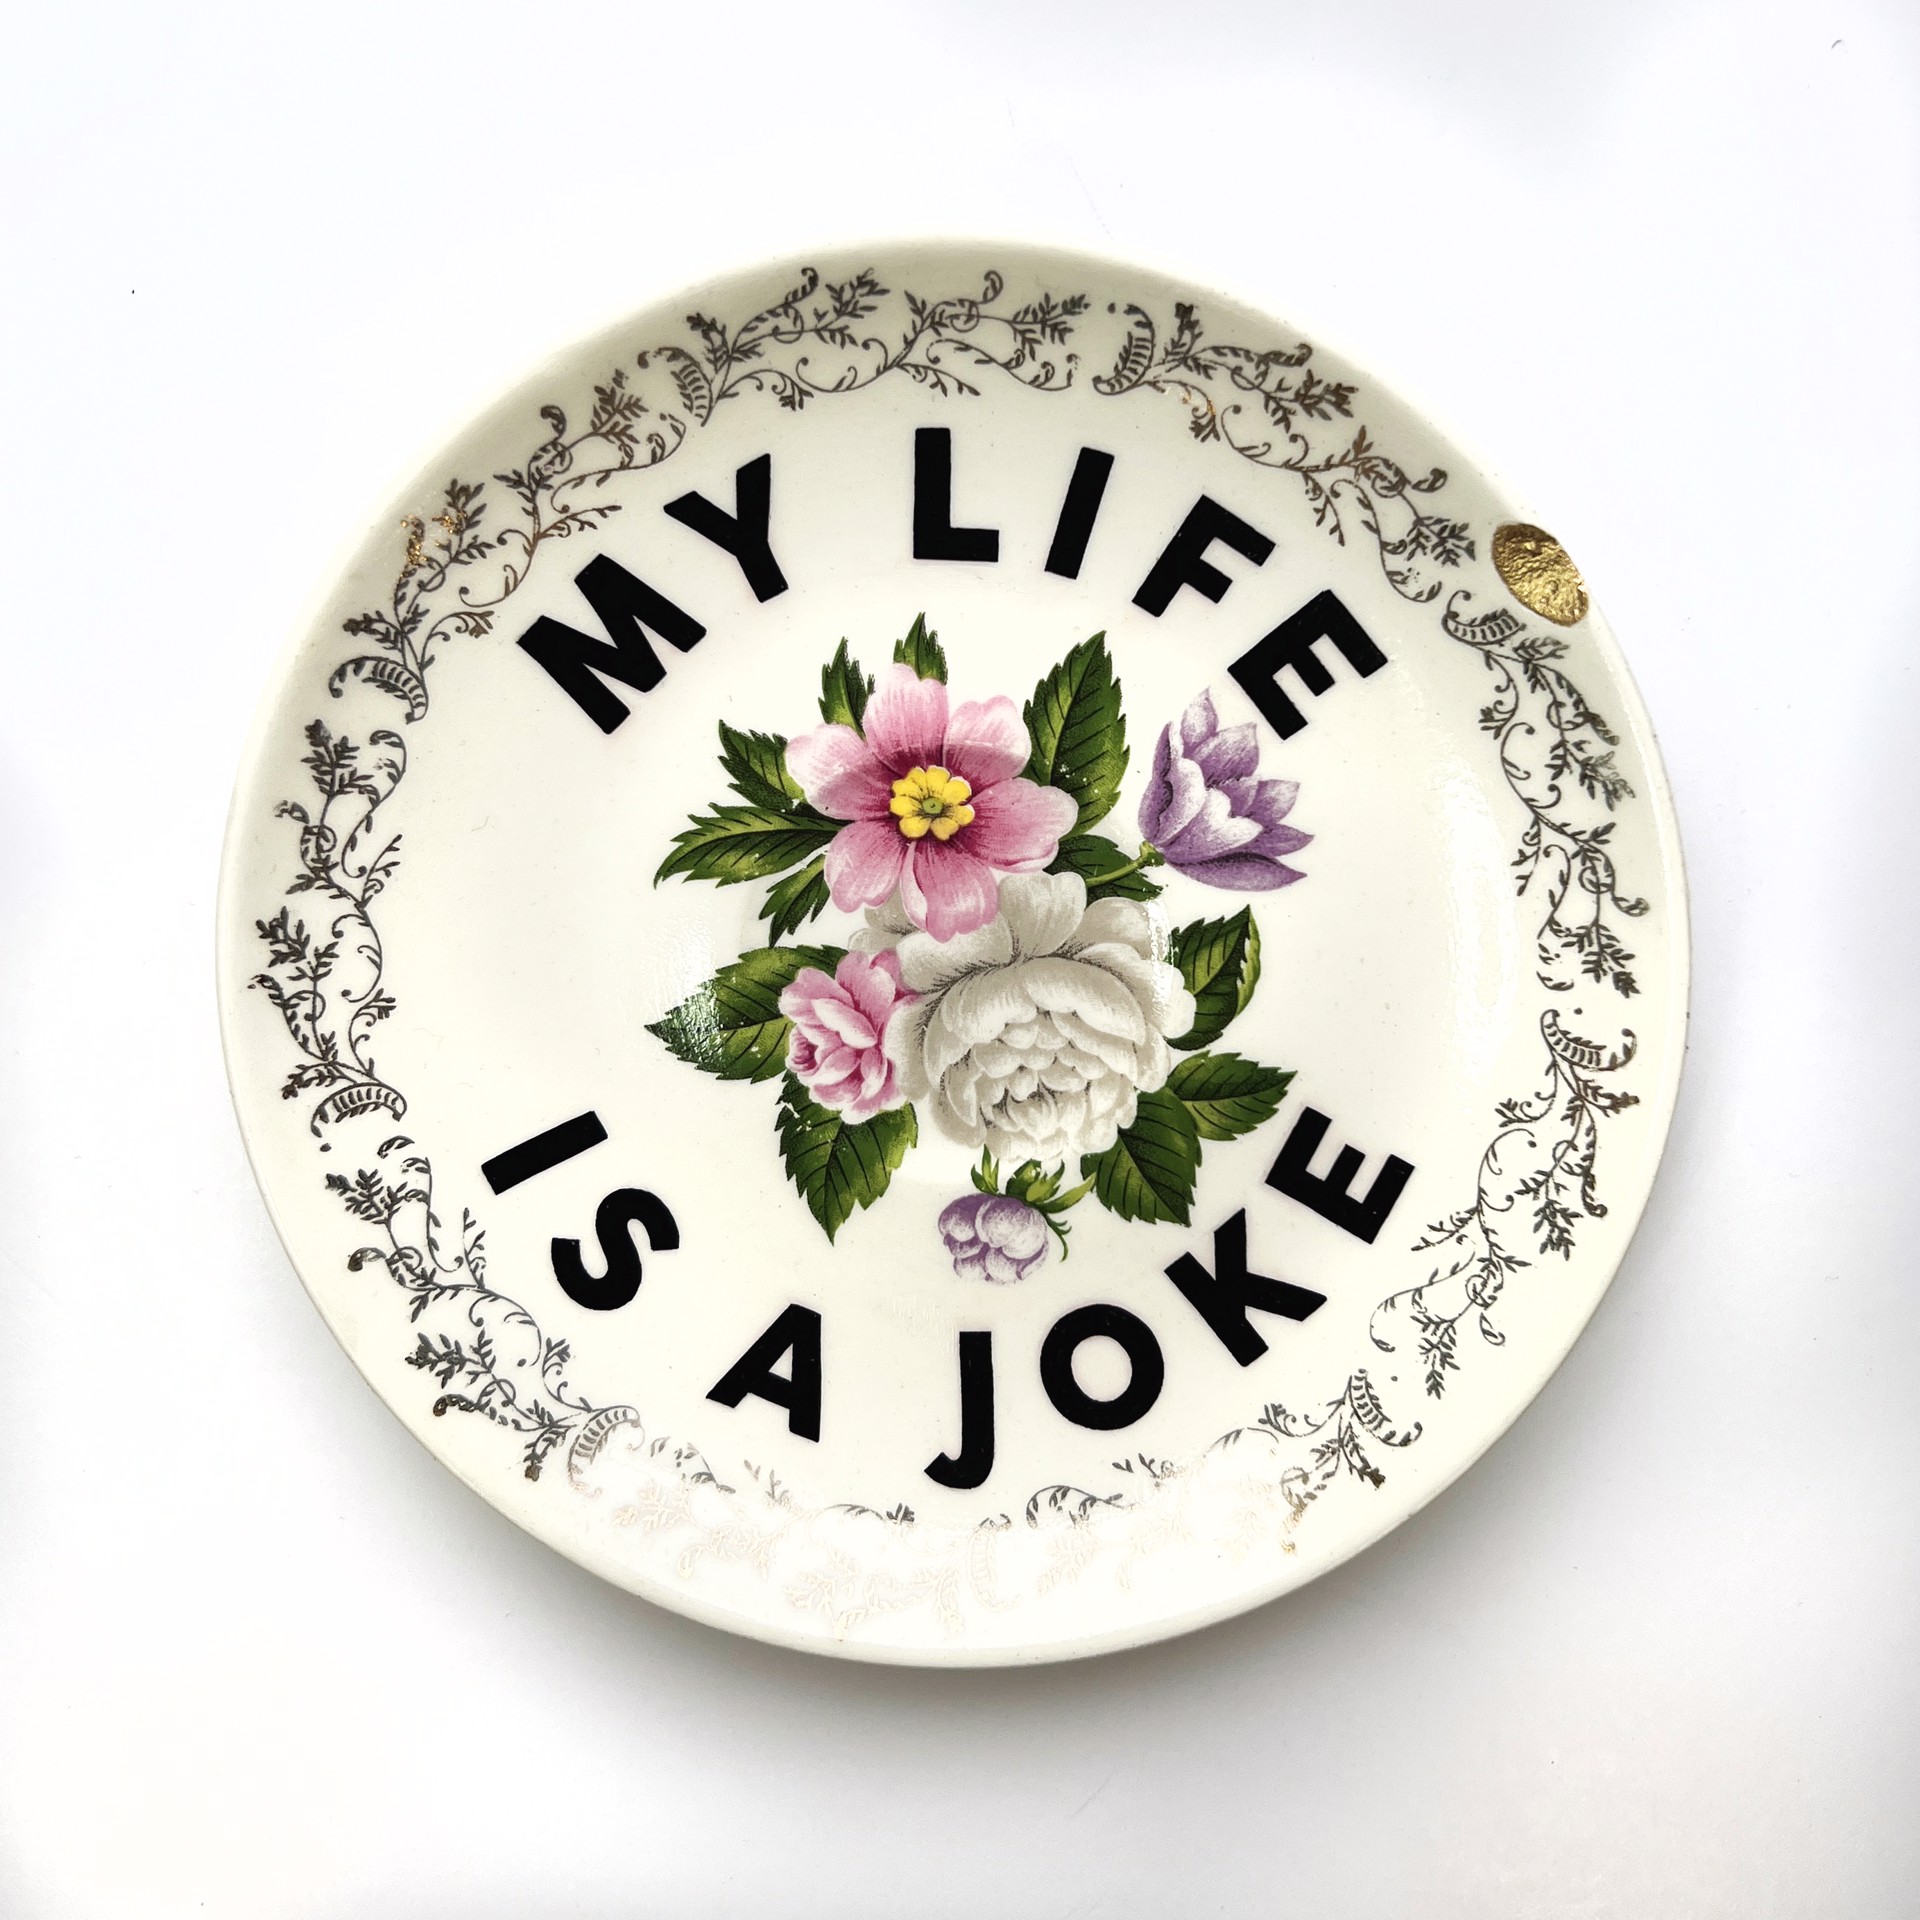 My life is a joke by Marie-Claude Marquis